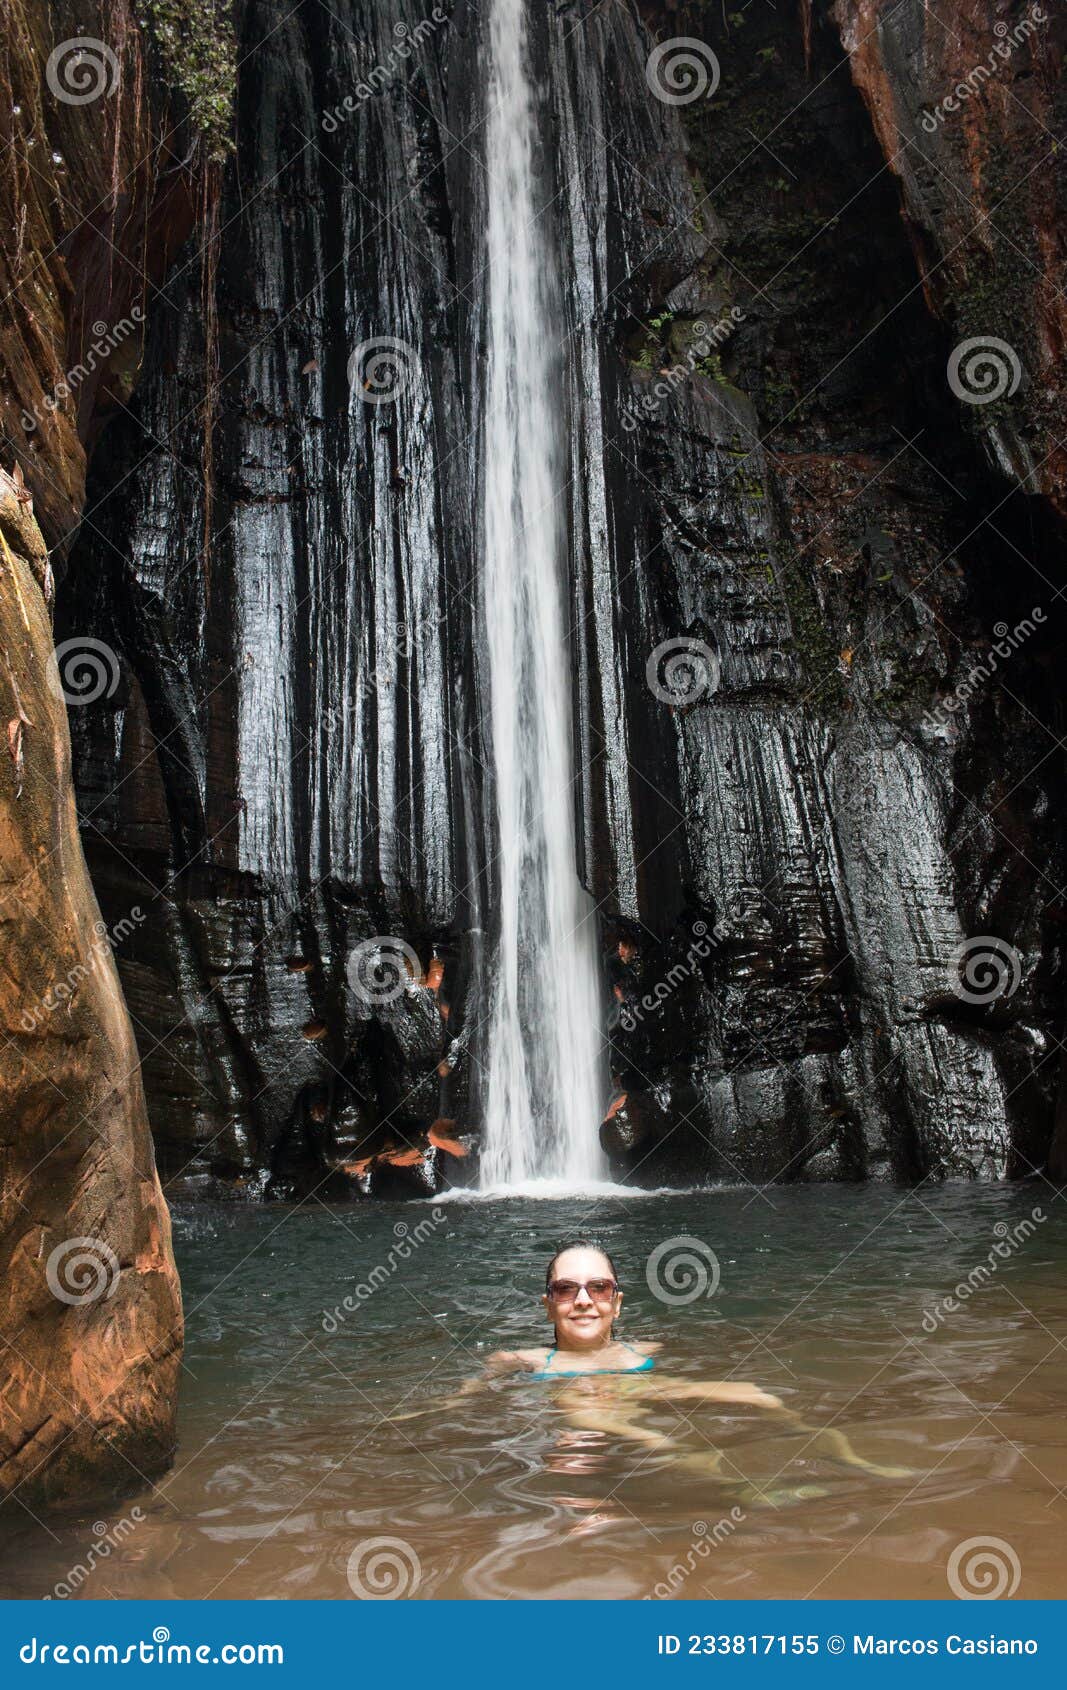 the waterfall cachoeira capelao, in brazil